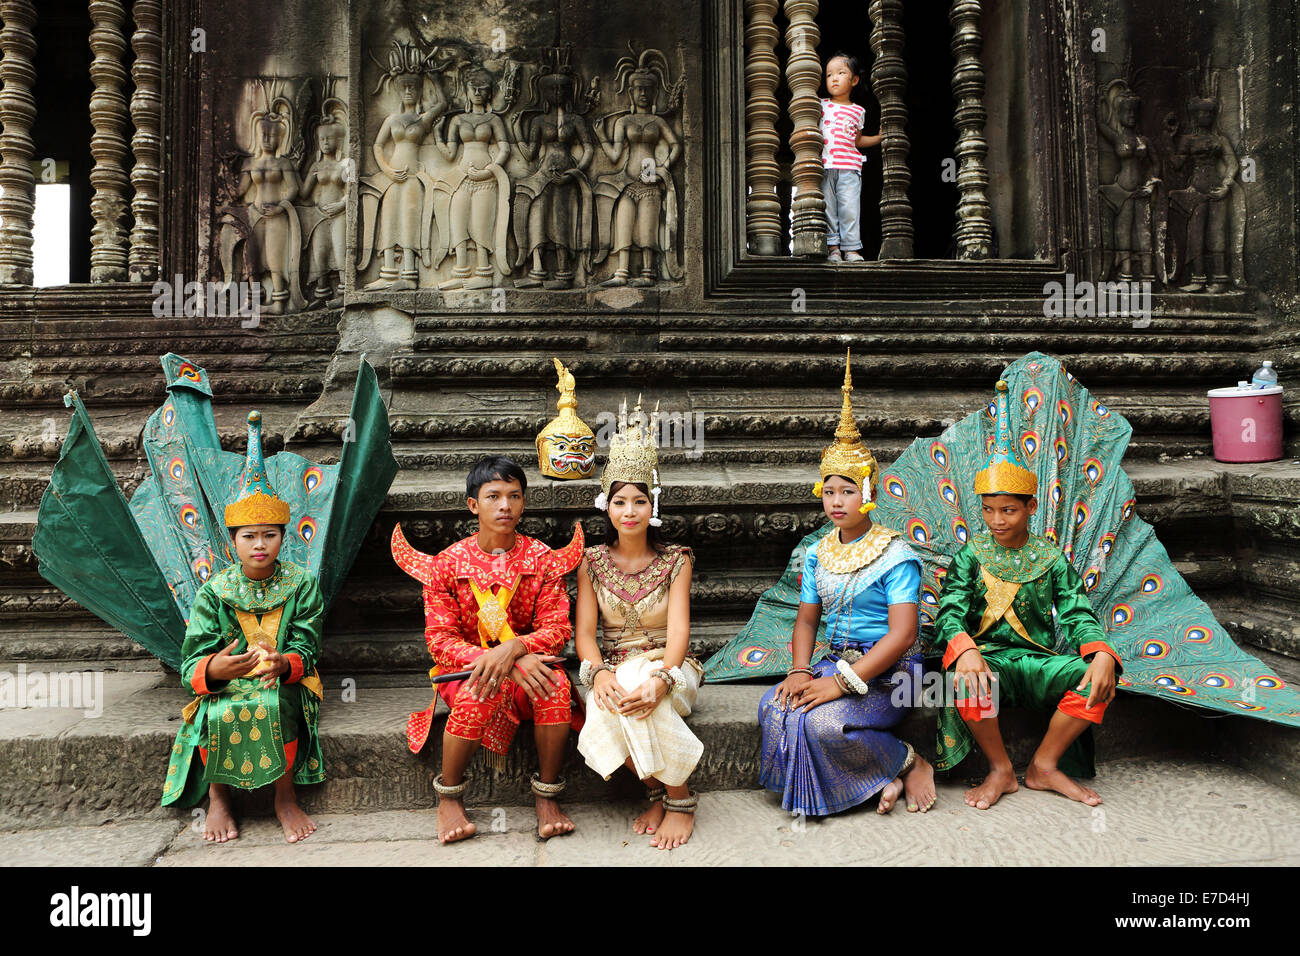 A group of men and women in traditional, Khmer style costumes at Angkor Wat in Siem Reap, Cambodia. Stock Photo